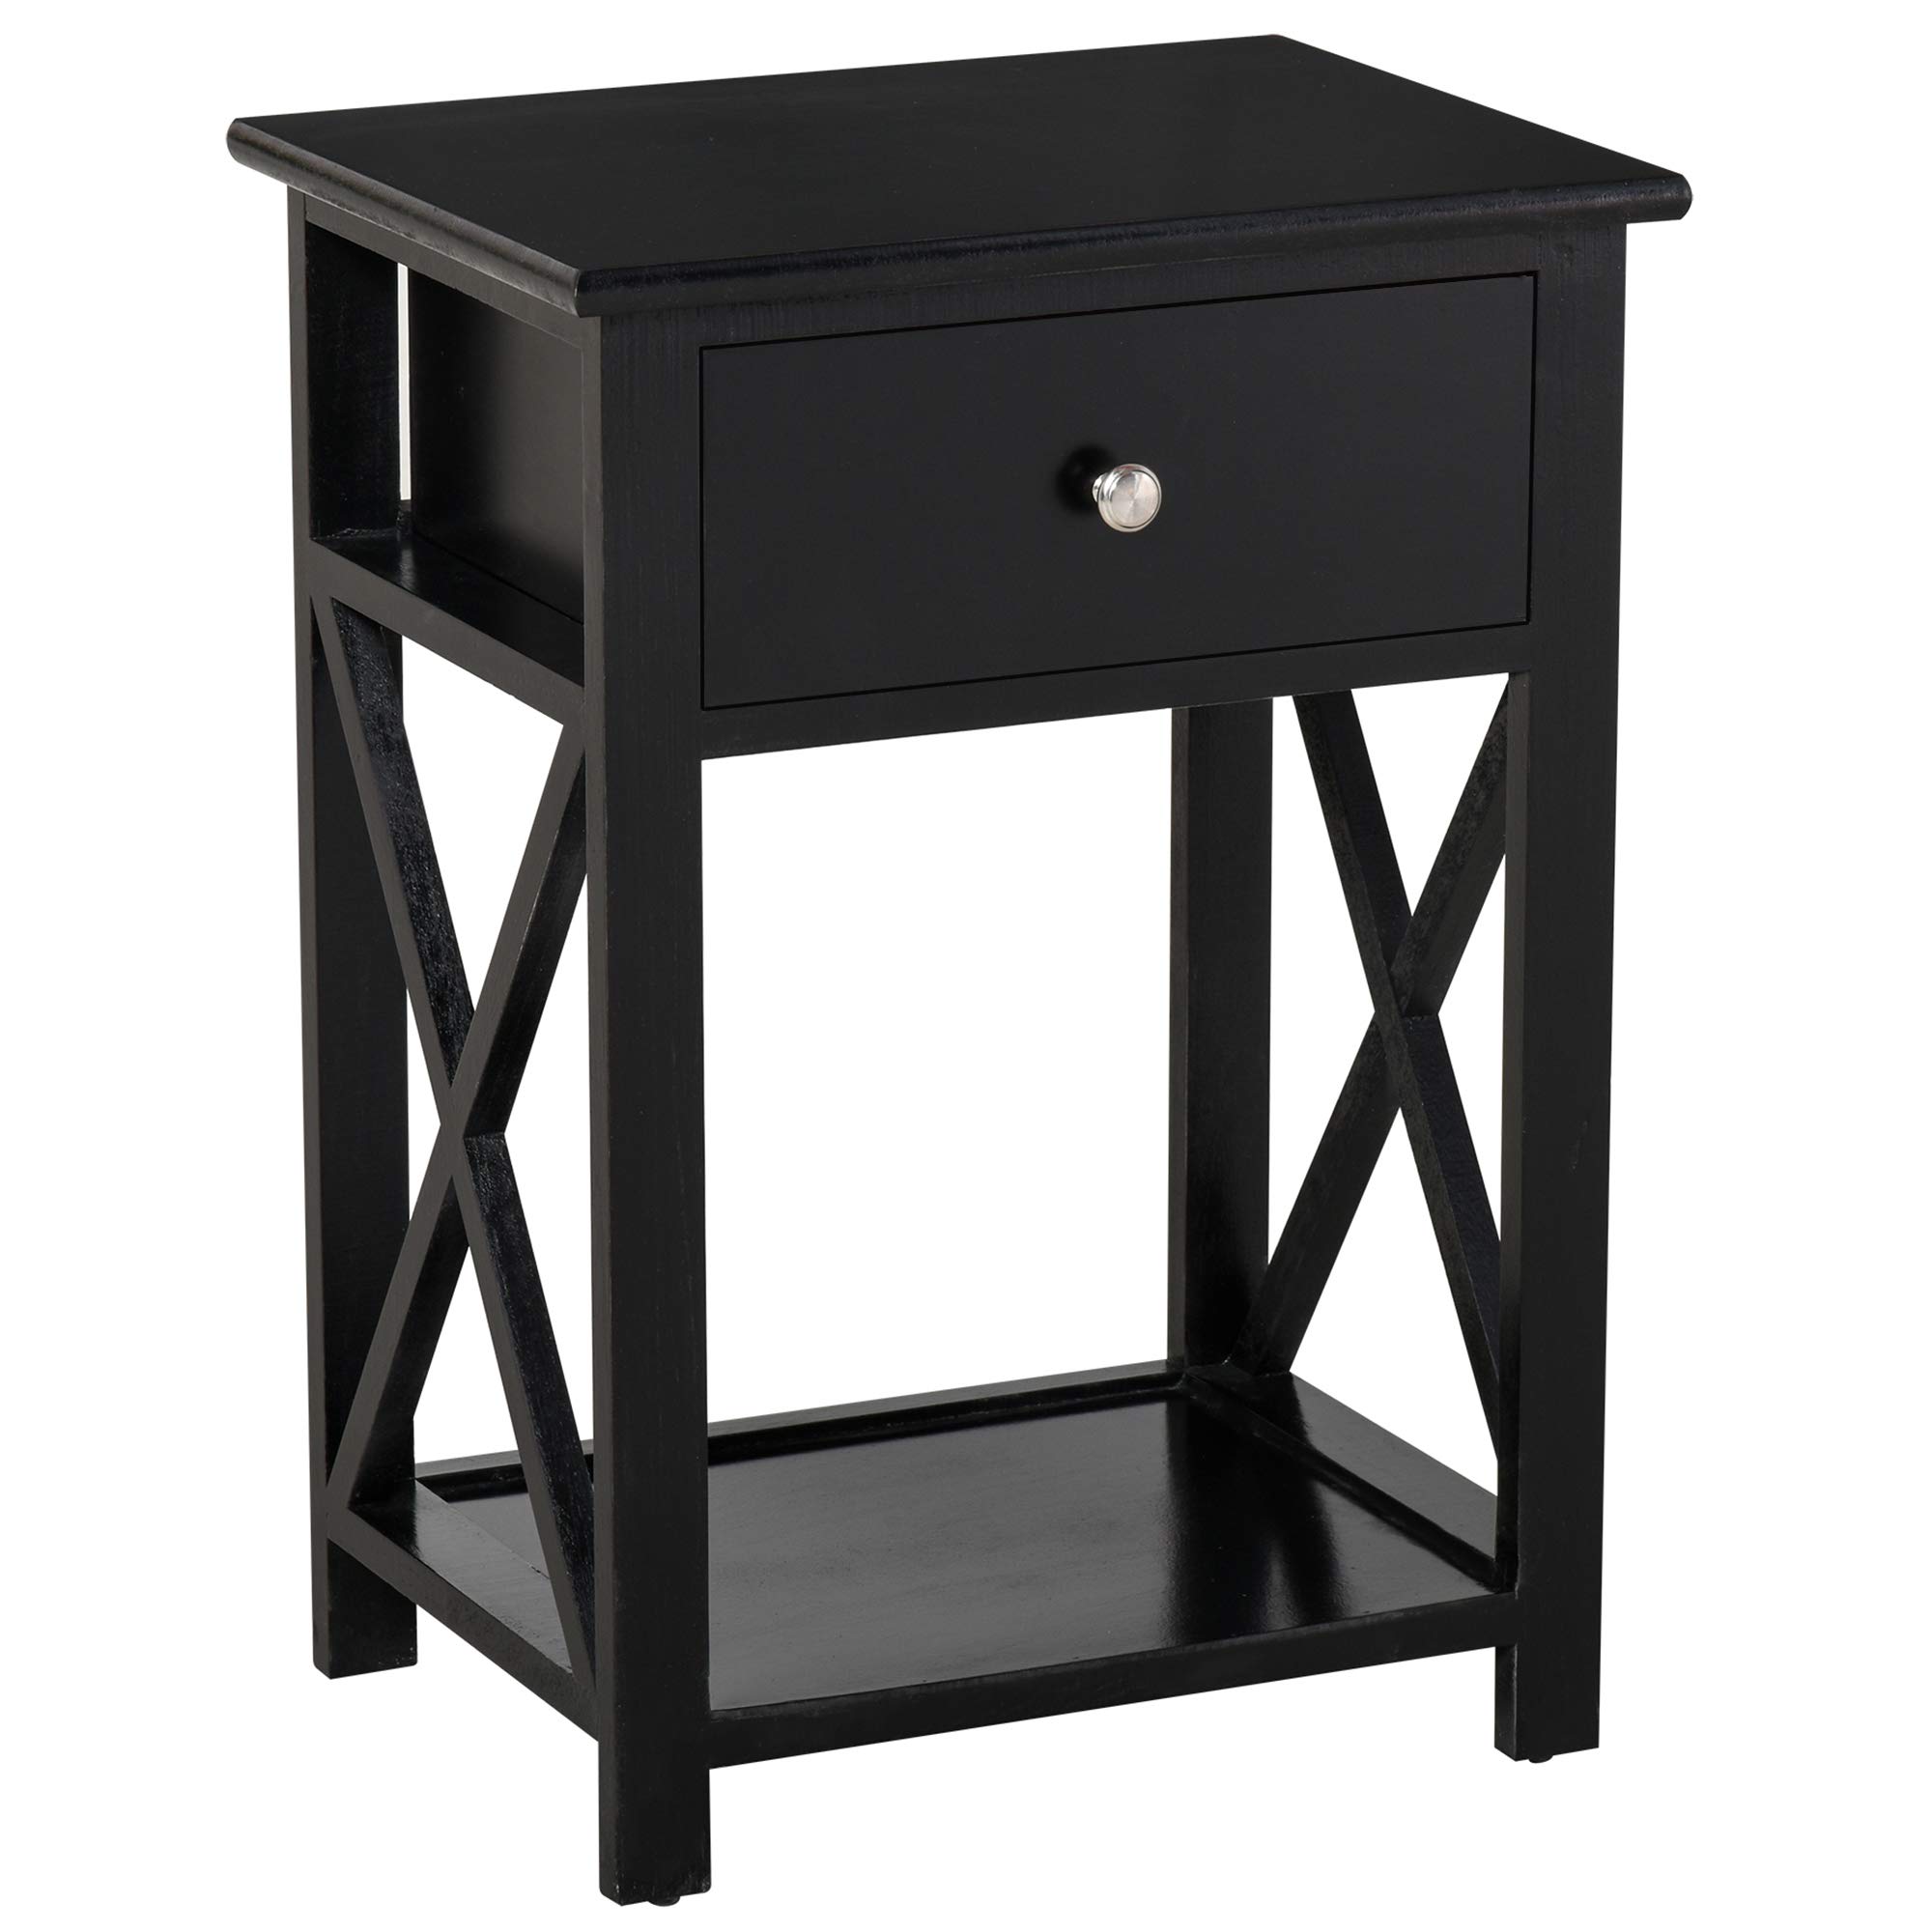 Homcom 22 Traditional Wood Accent End Table With Storage Drawer For Living Room Or Bedroom Black